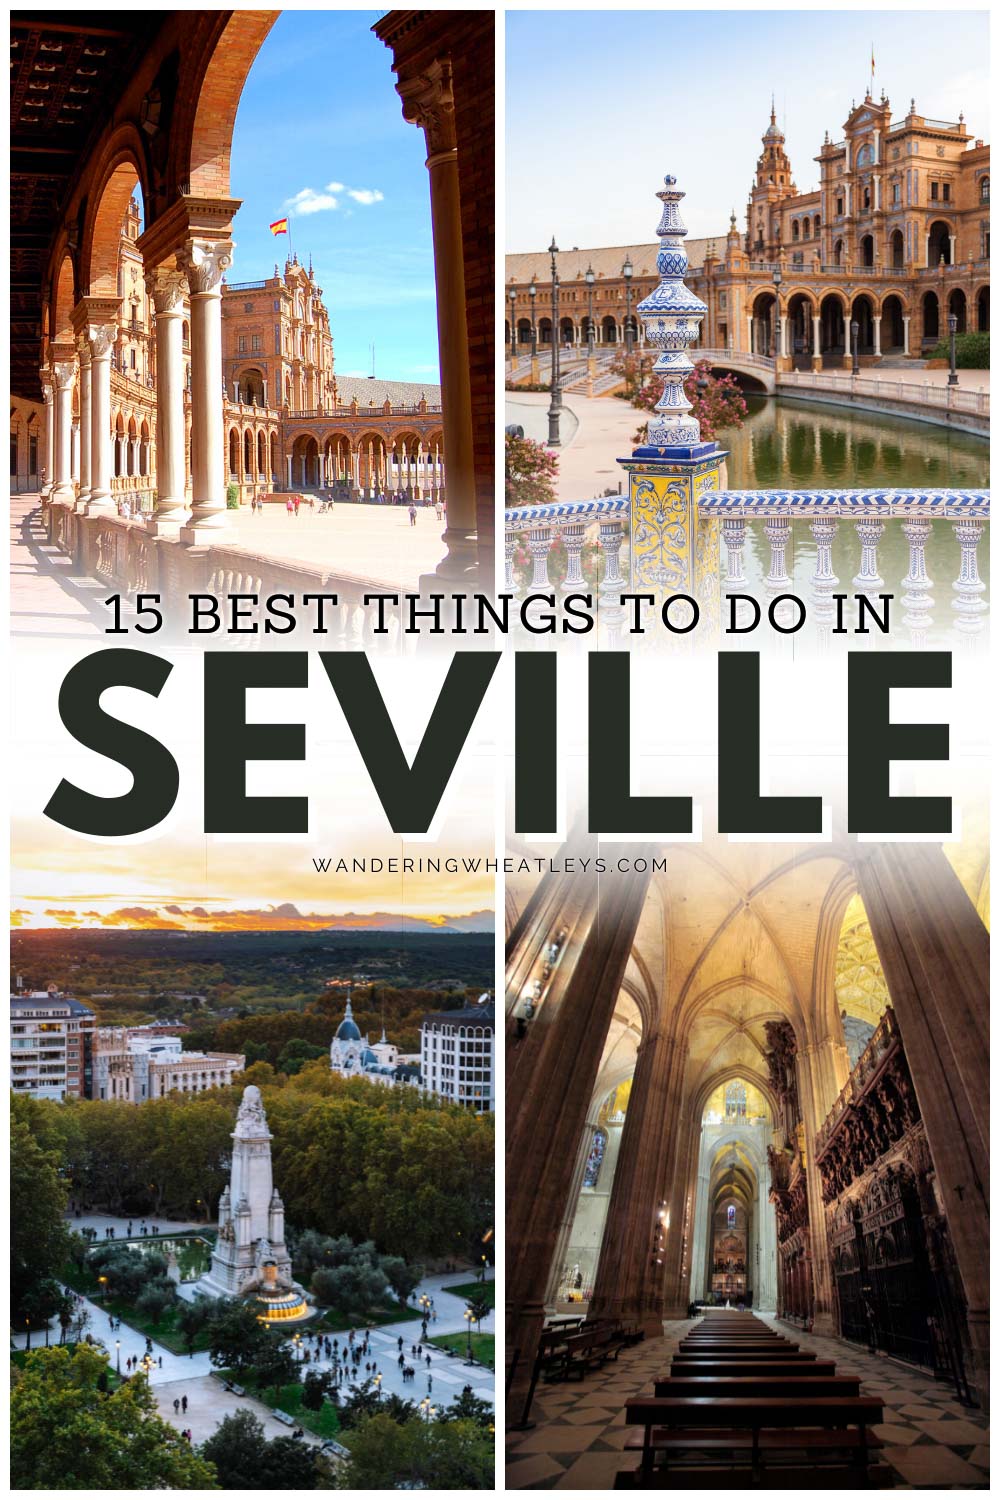 The Best Things to do in Seville, Spain